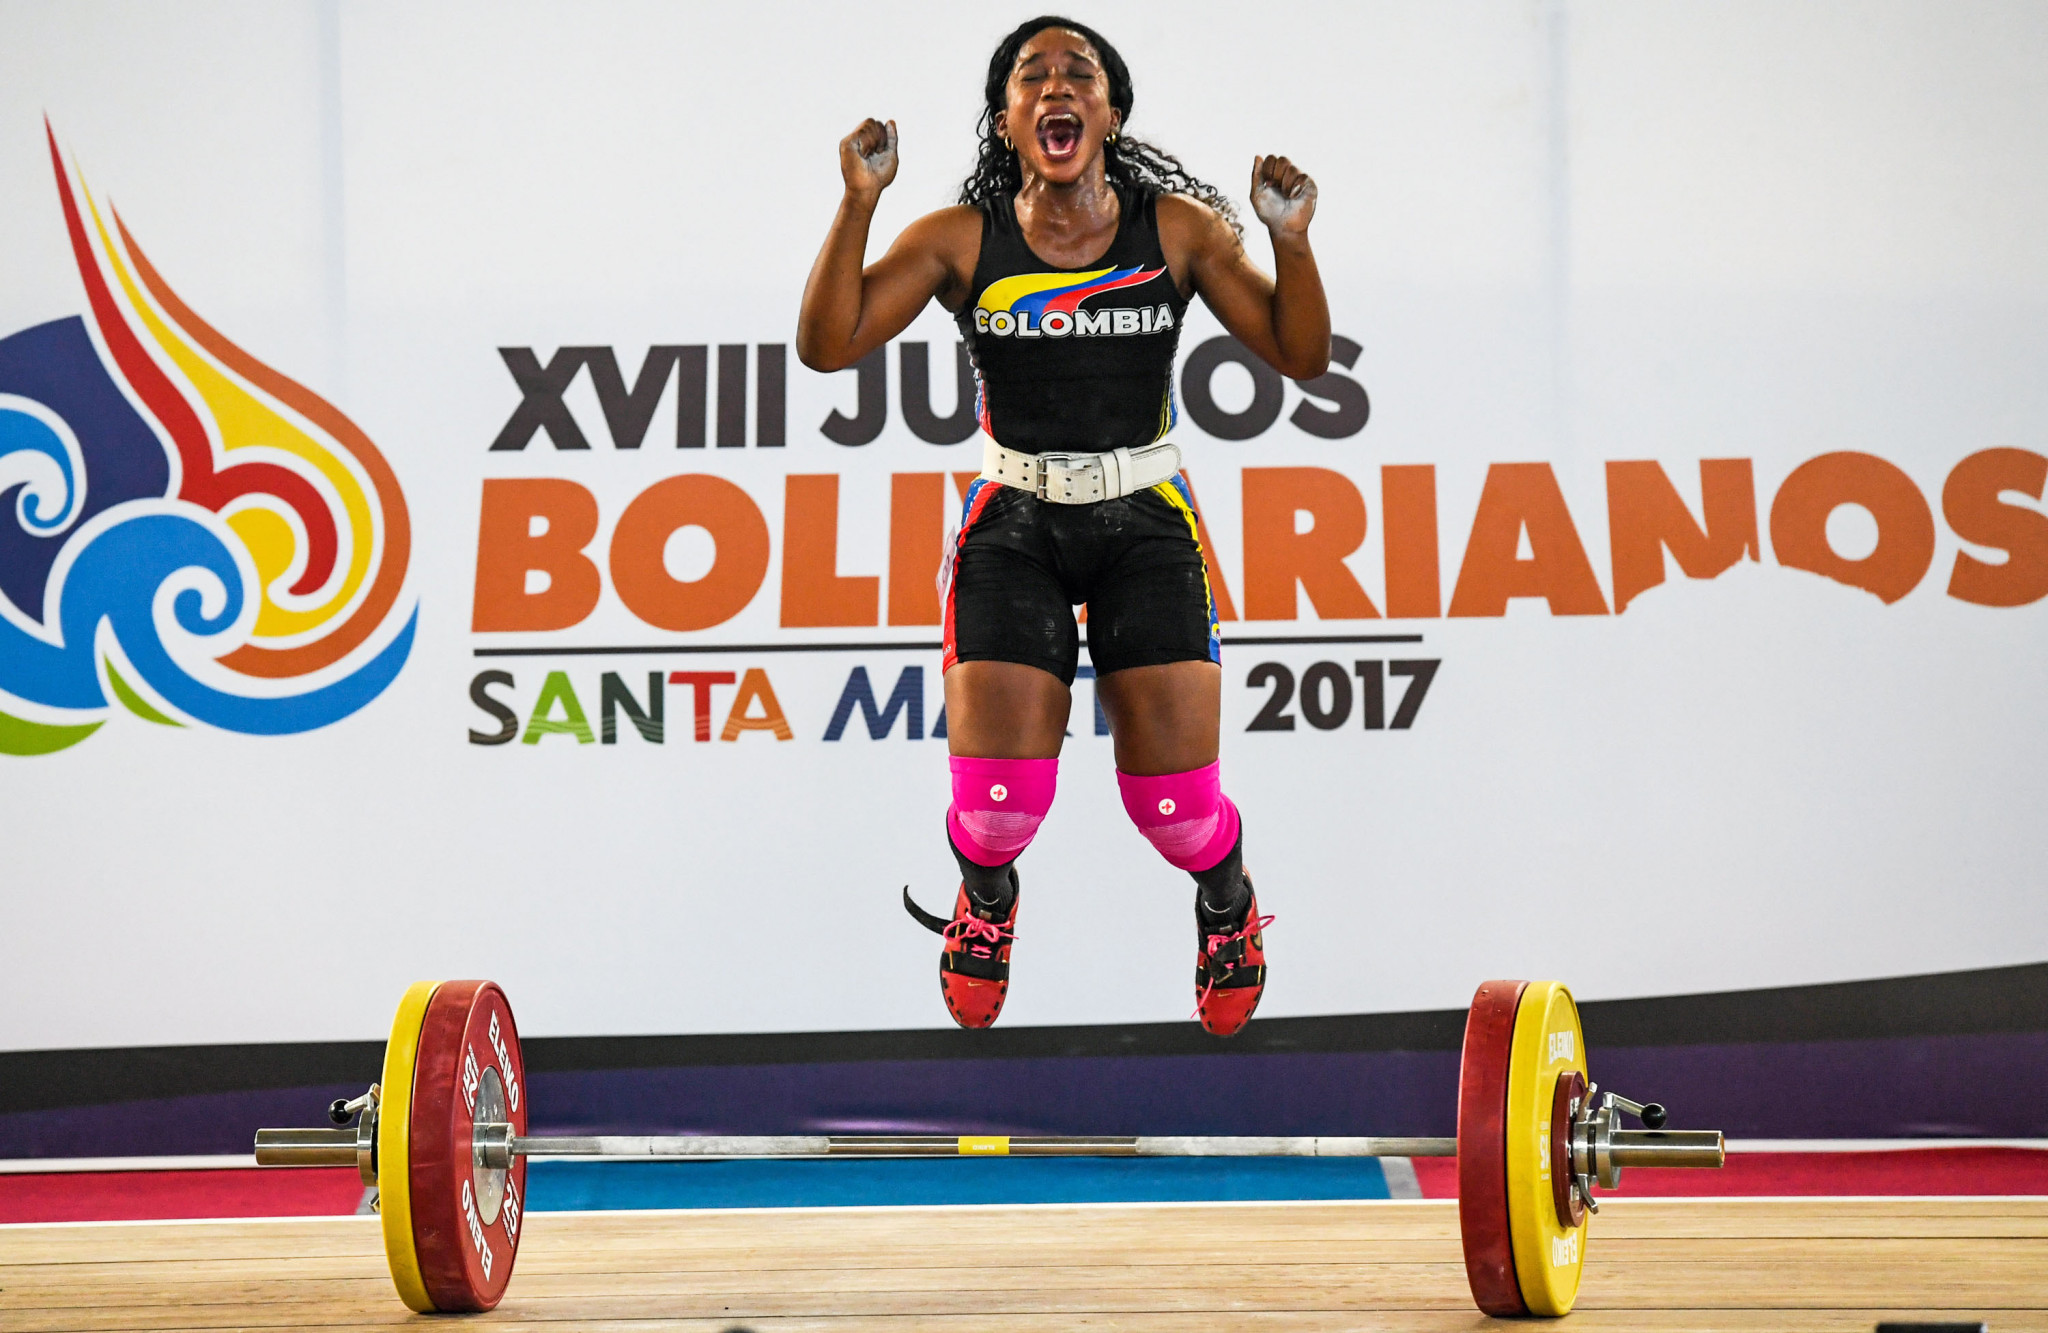 Colombian Lina Rivas celebrates after obtaining the gold medal in the women's 63kg event during last month's XVIII Bolivarian Games in Santa Marta, Colombia ©Getty Images